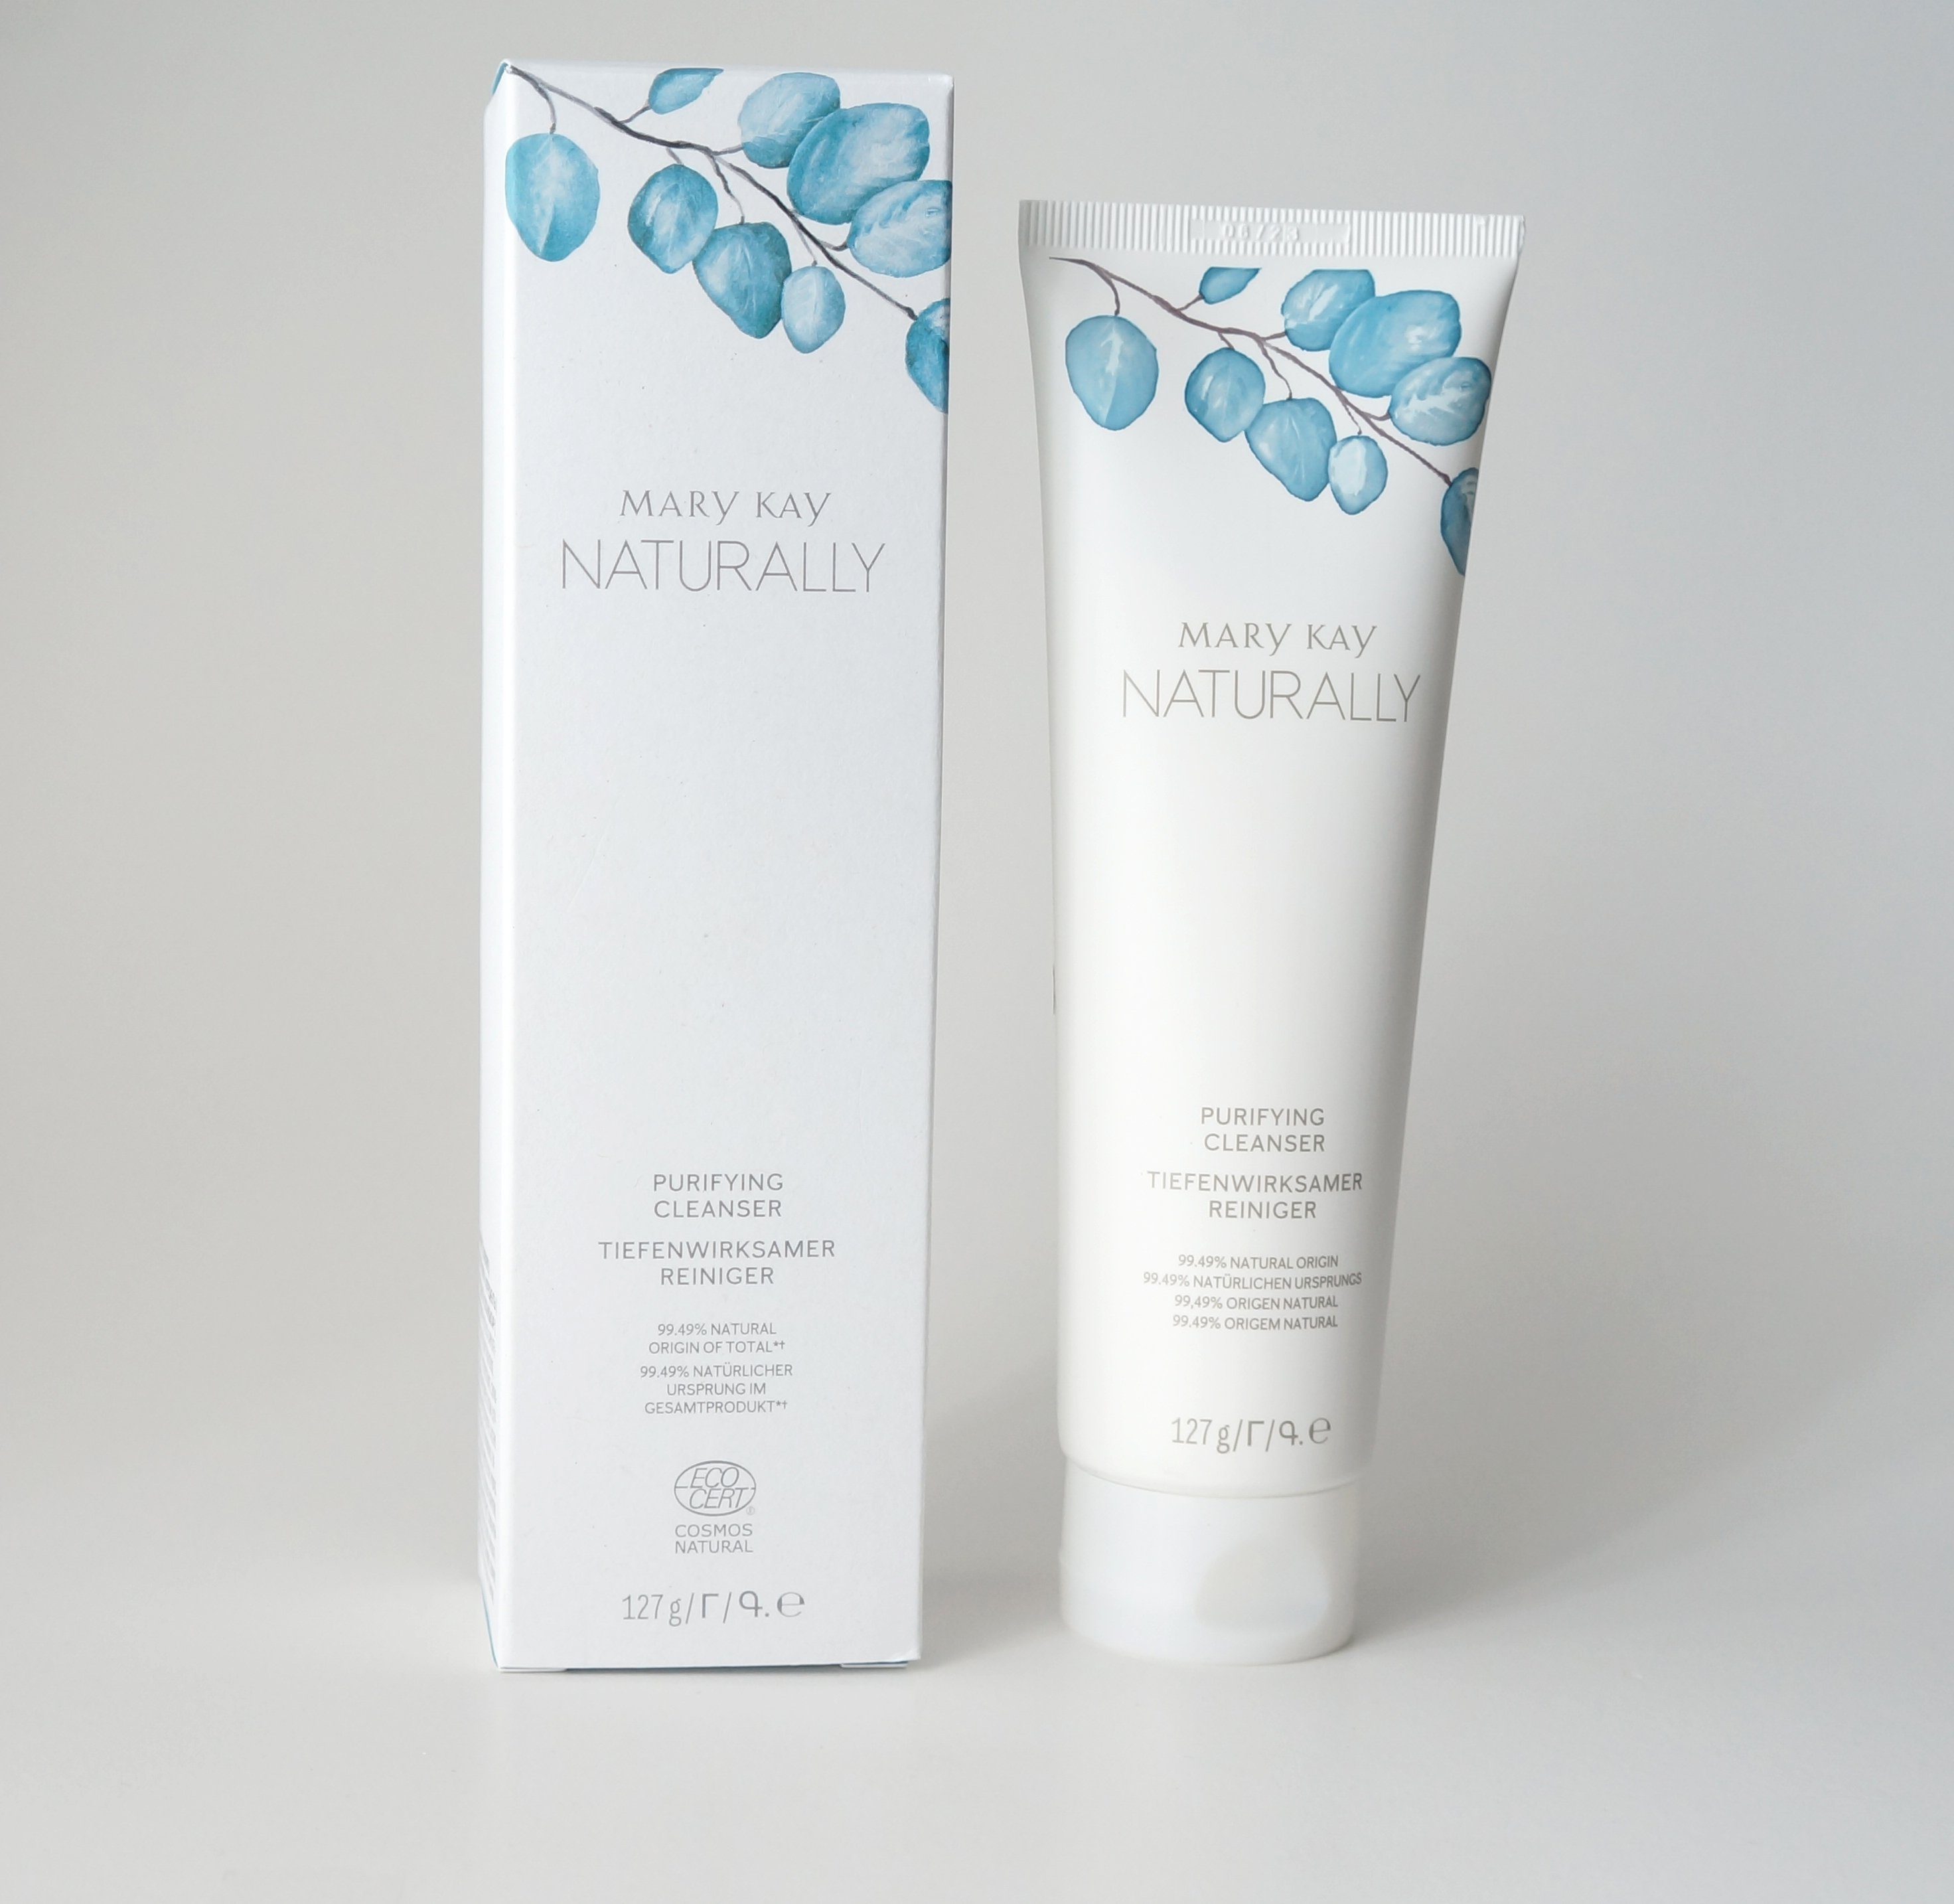 Cleanser Naturally Reiniger Gesichtspflege Tiefenwirksamer Kay Kay Mary Mary Purifying 127g